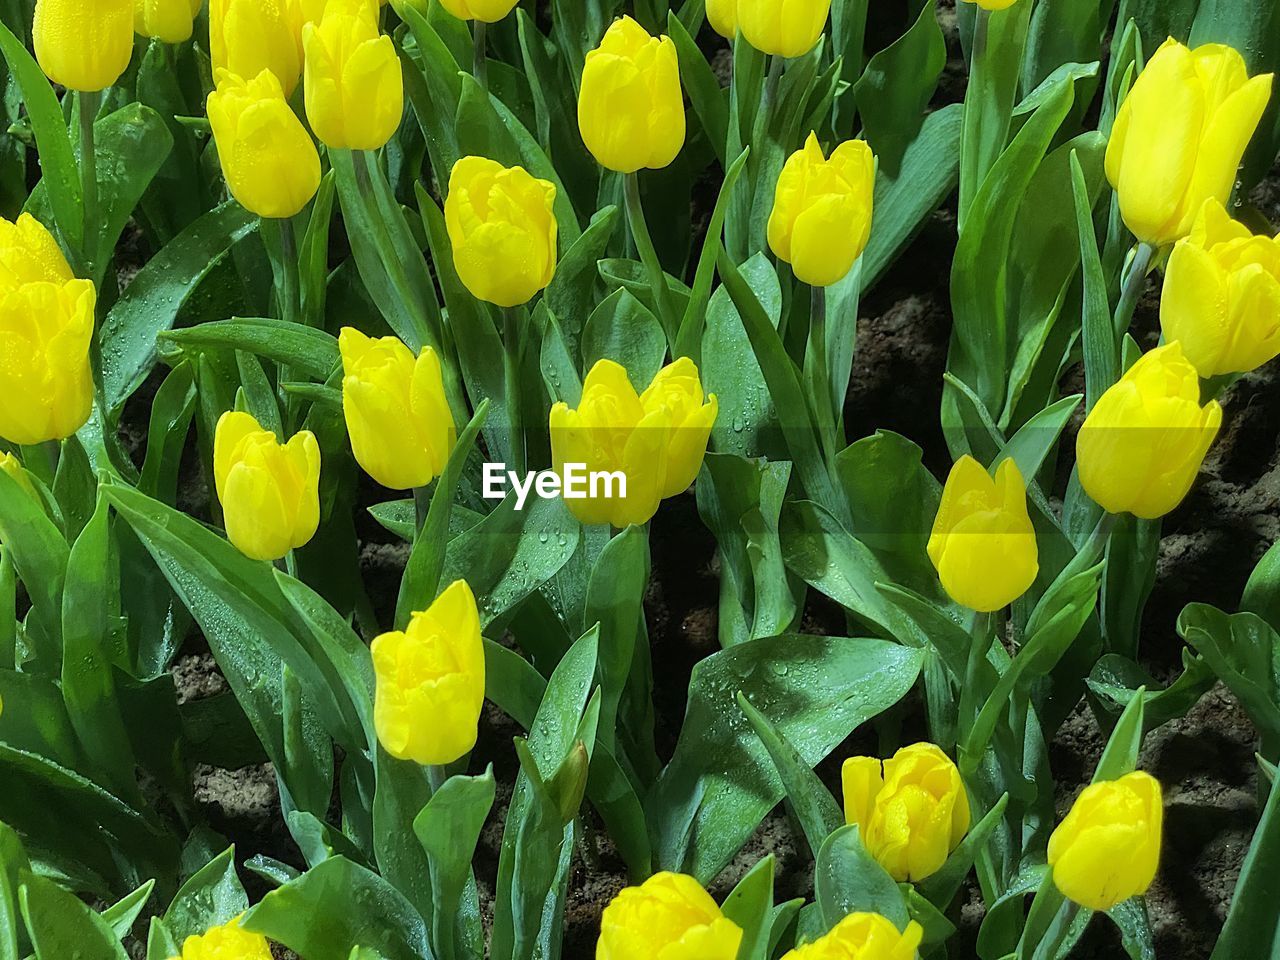 CLOSE-UP OF YELLOW FLOWERING PLANTS IN BLOOM